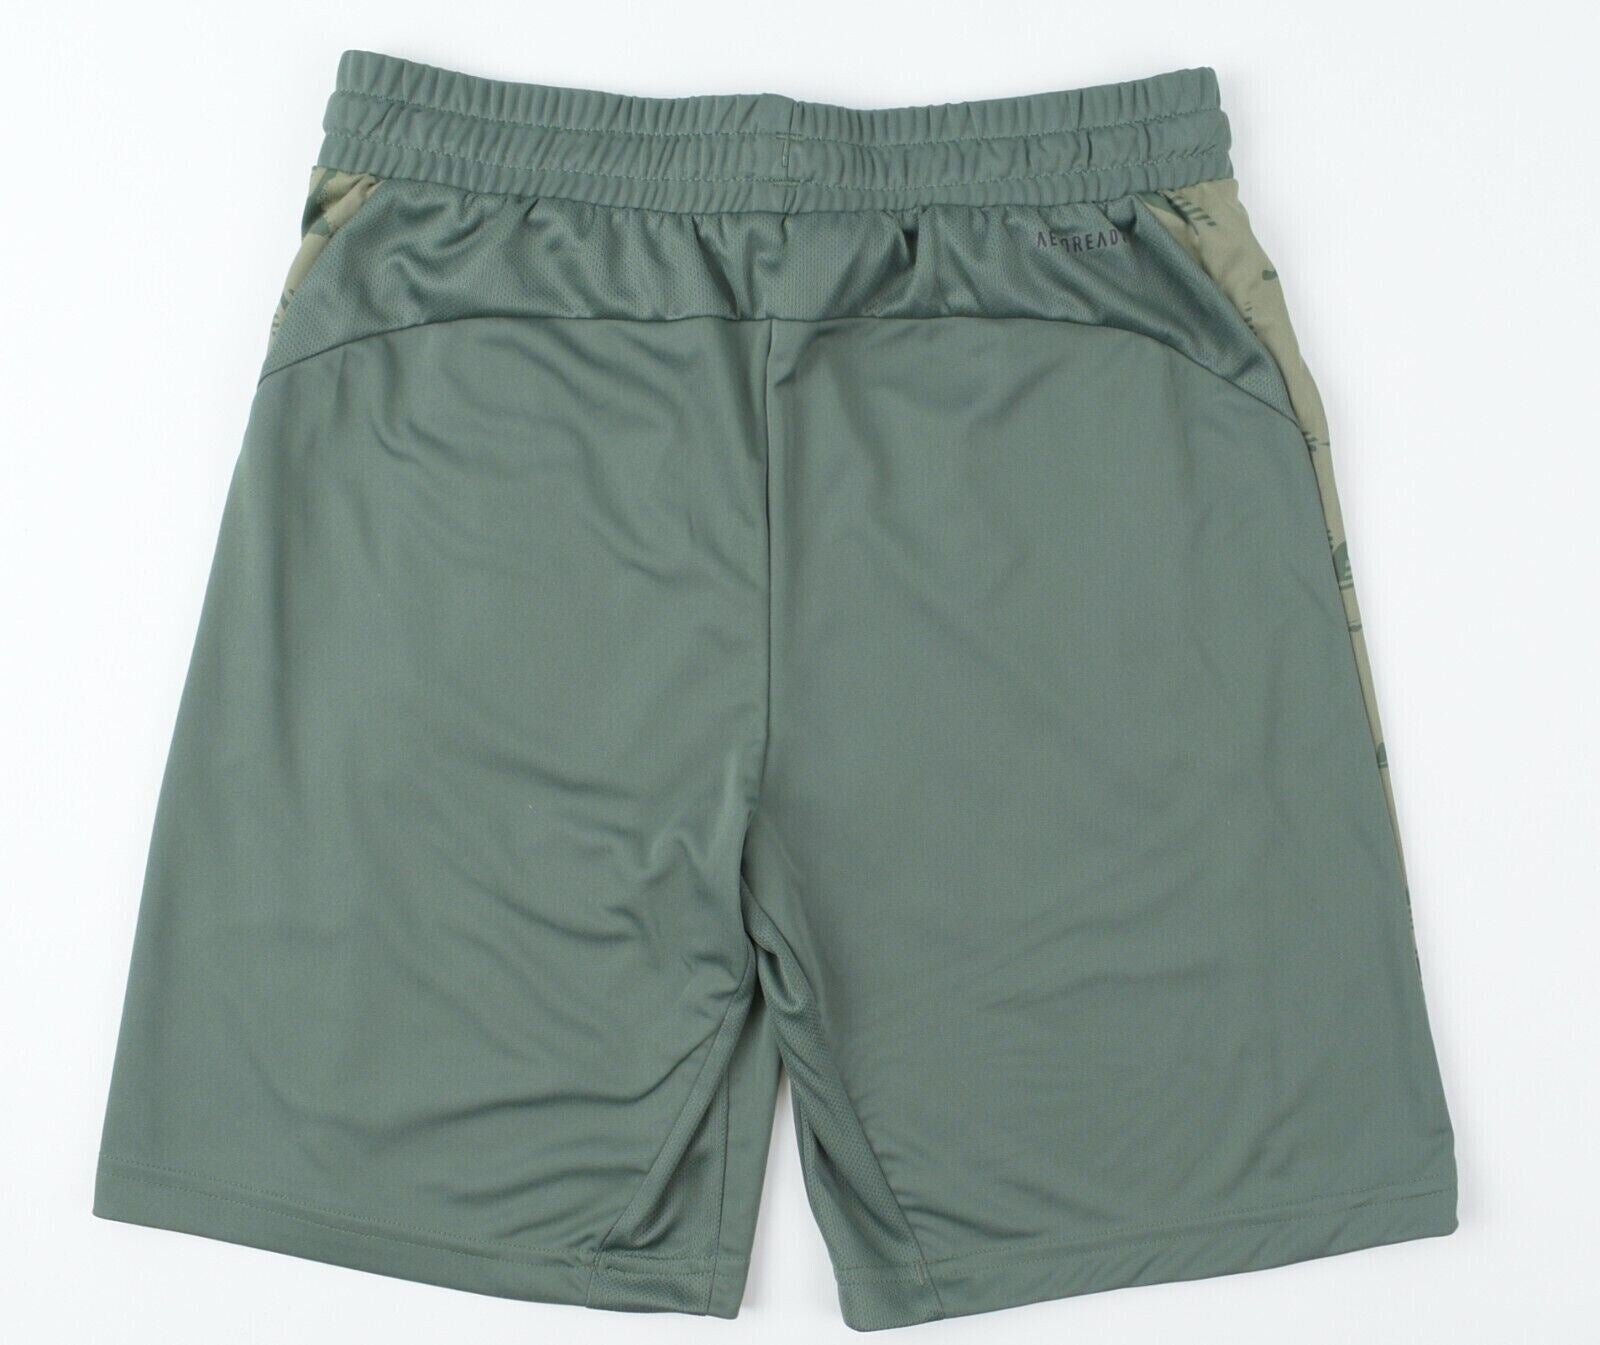 ADIDAS Boys' D2M Designed To Move Shorts, Green/Camo, size 13-14 Years